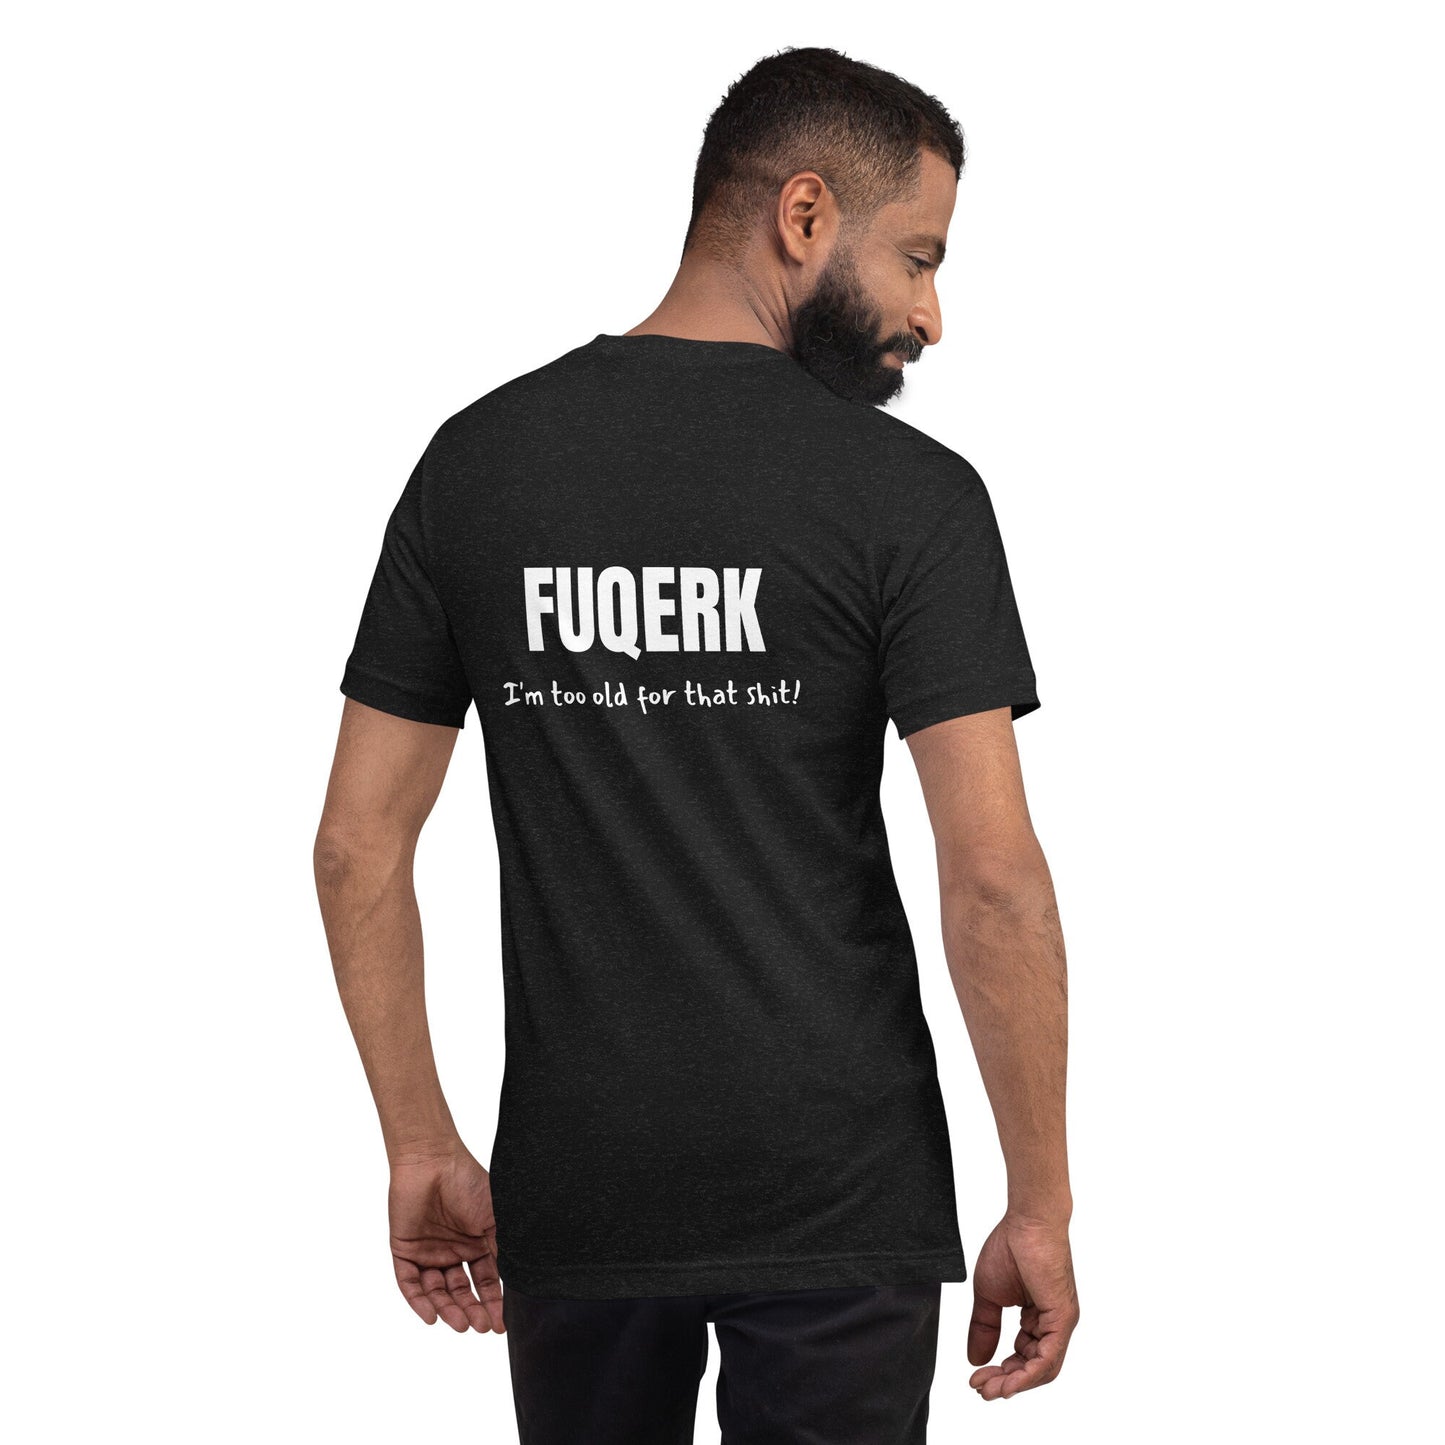 FUQERK Vibes: 'I'm Too Old for This Sh*t!' - Black Unisex Tee